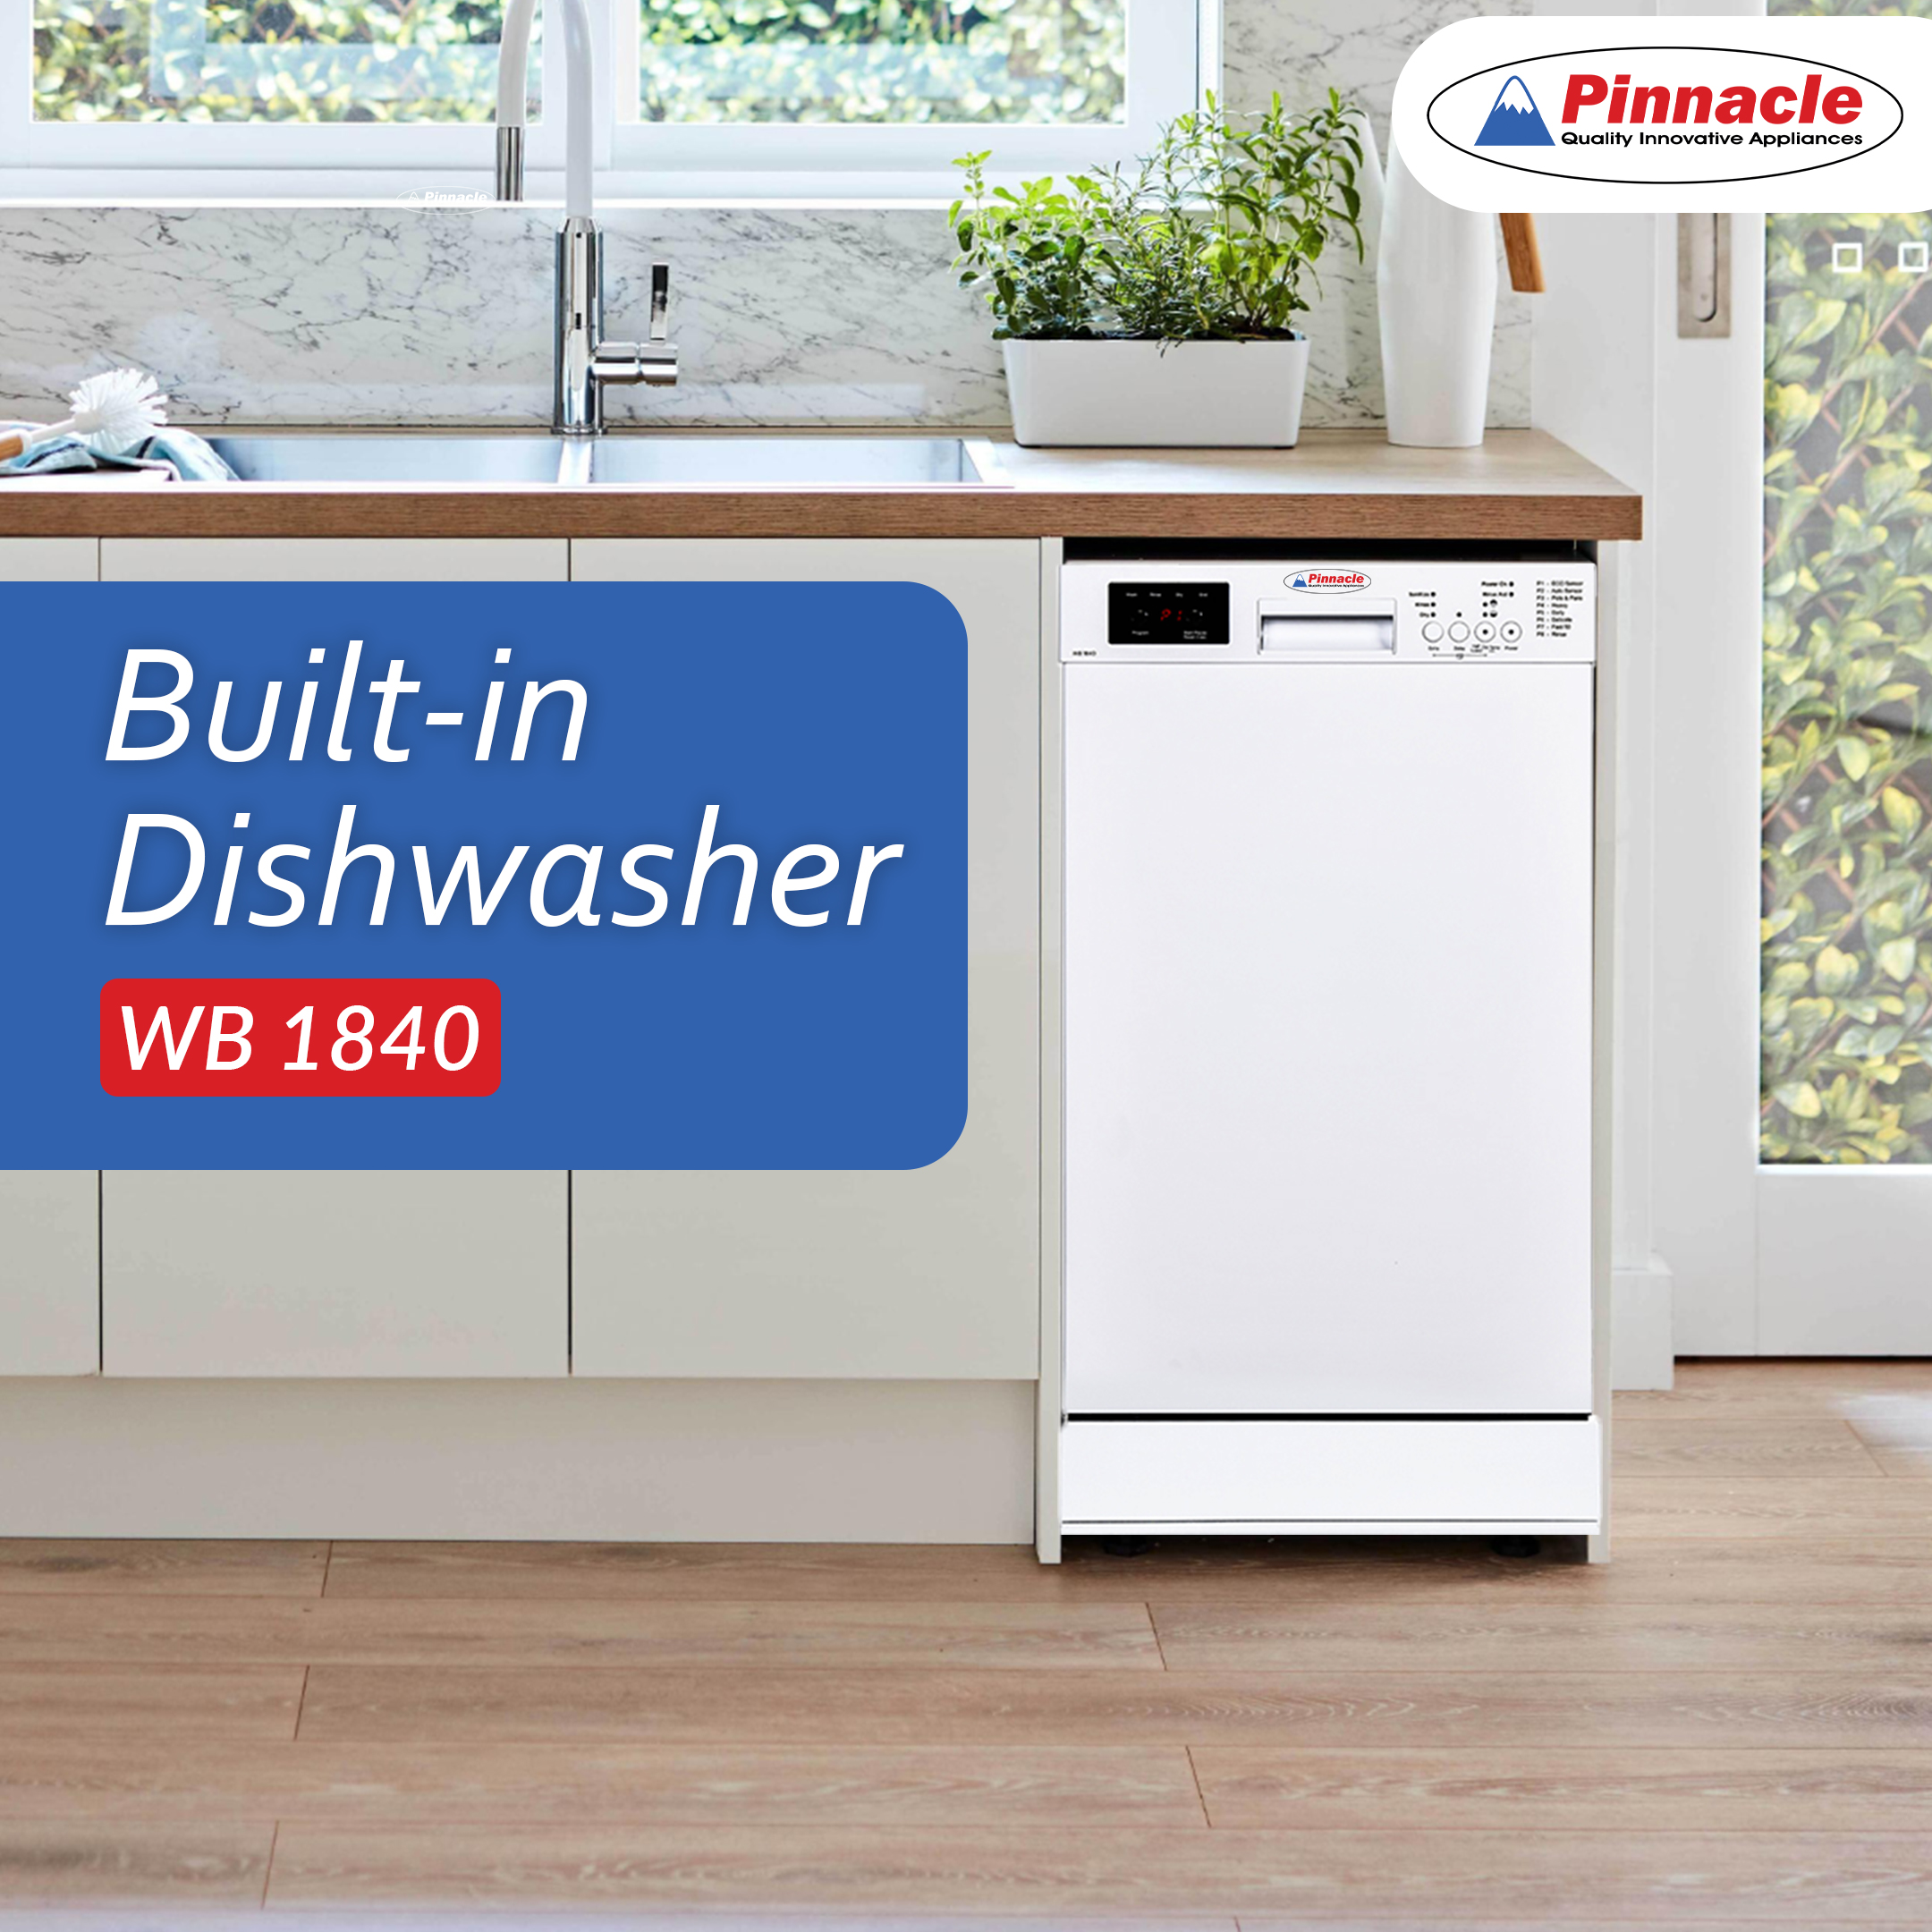 Pinnacle Combos Introduces the Pinnacle 18-Inch Built-In Dishwasher:  A Perfect Blend of Efficiency and Versatility